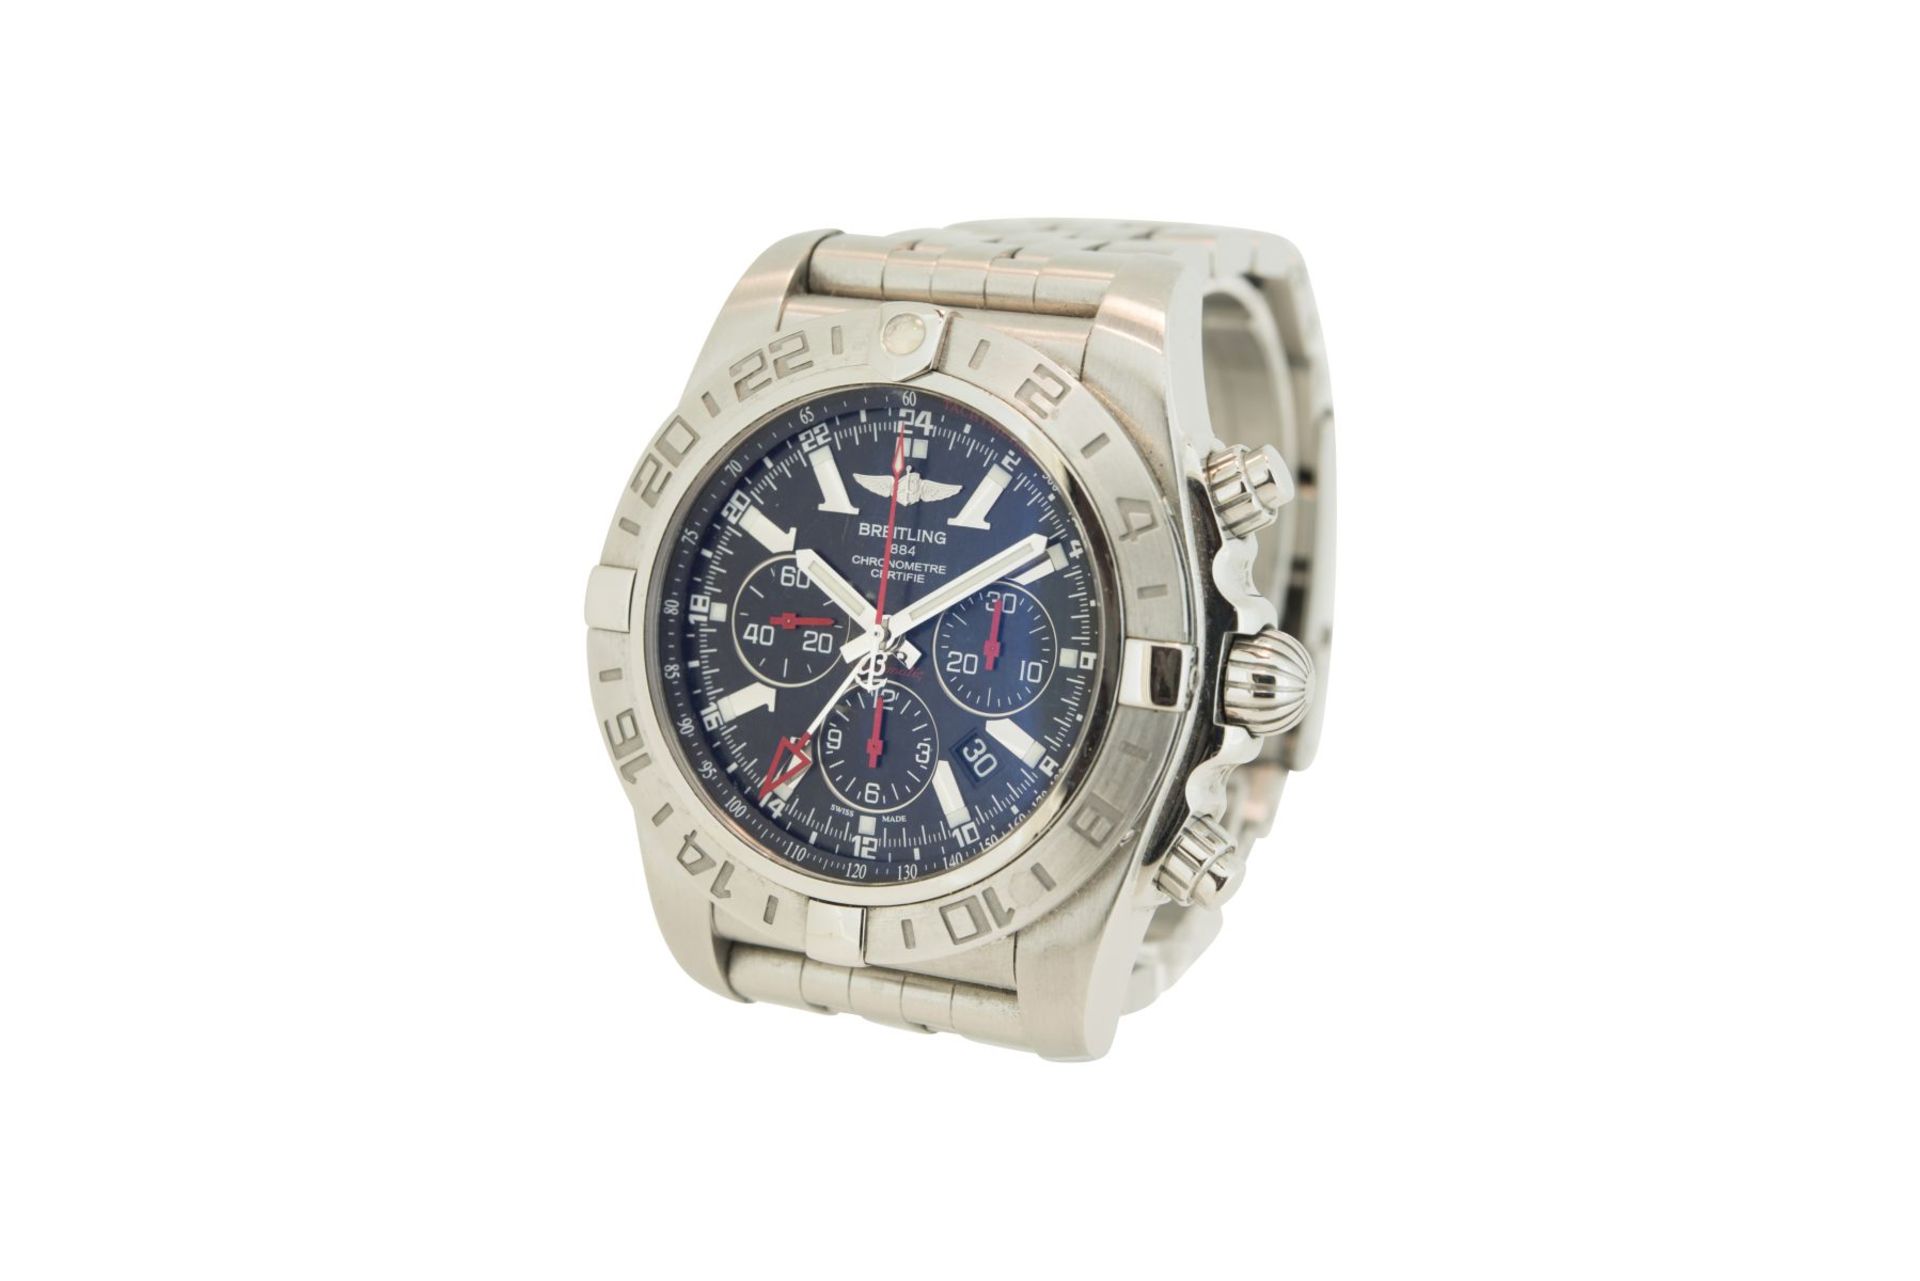 Breitling Chronomat GMT limited Edition - Image 2 of 2